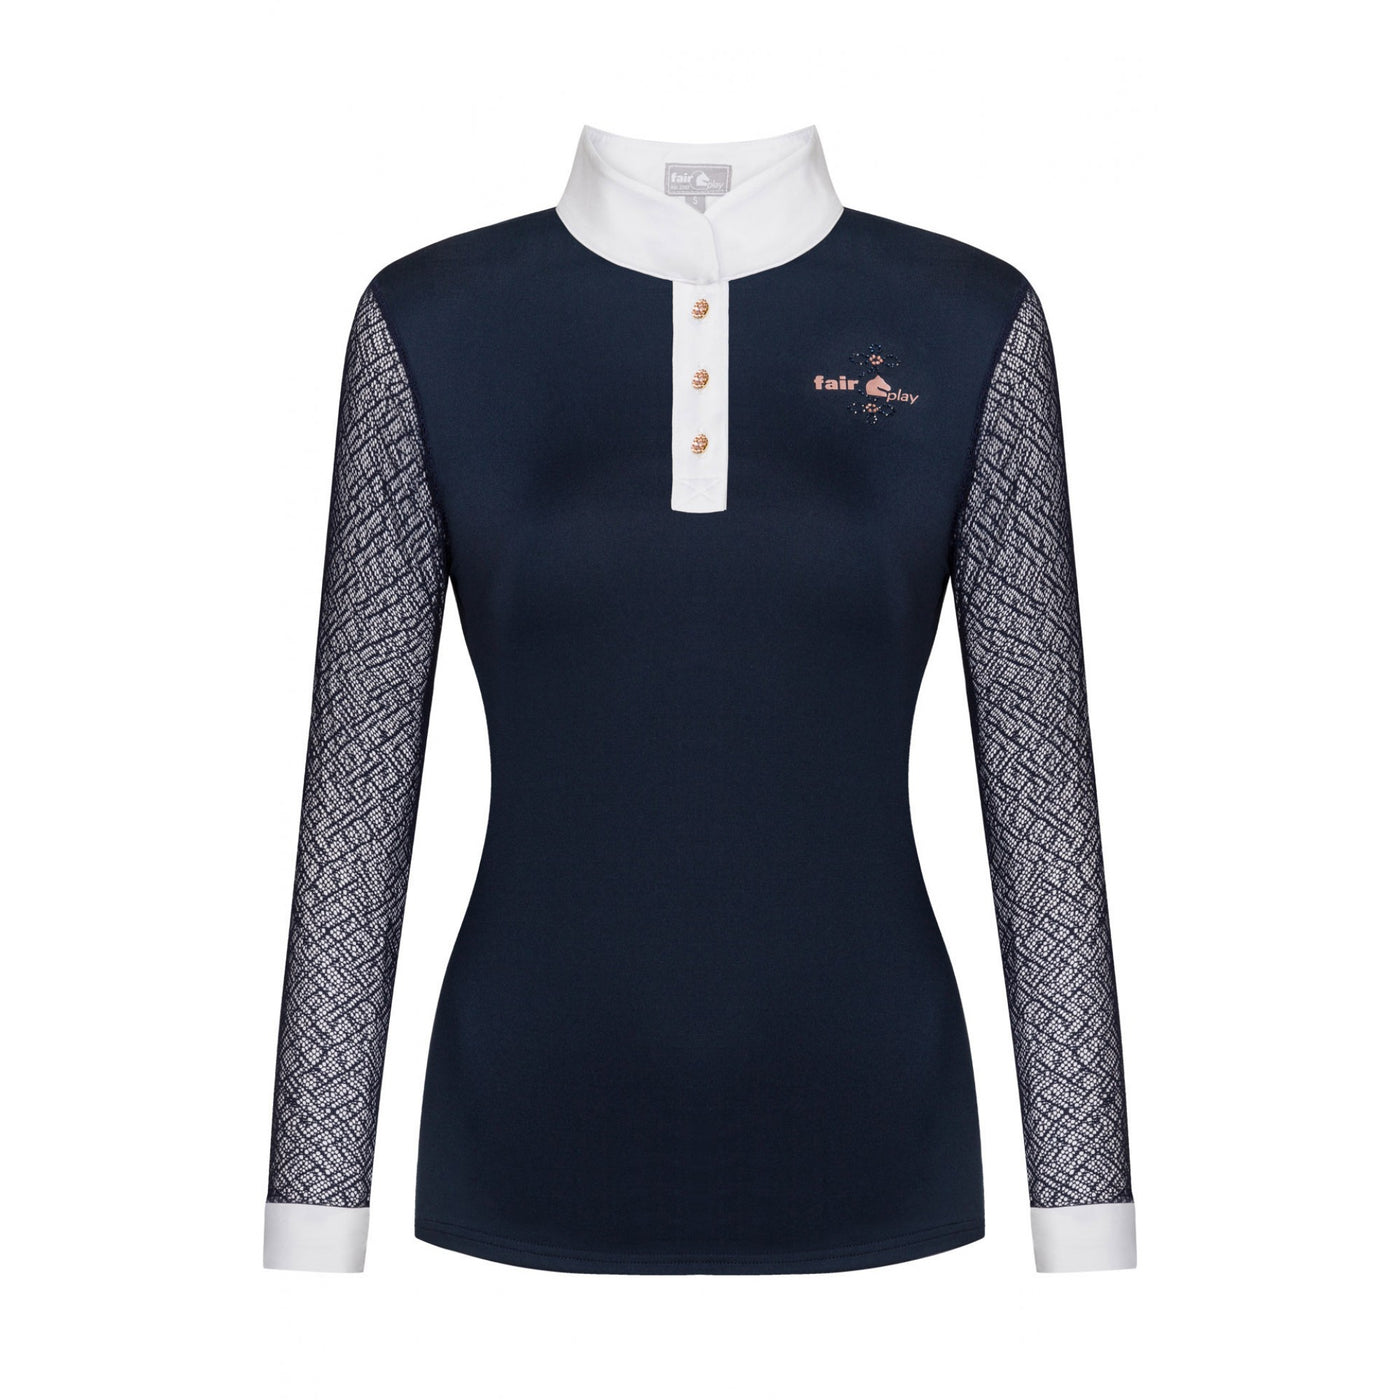 FAIR PLAY CECILE ROSEGOLD LONG SLEEVE COMPETITION SHOW SHIRT - NAVY